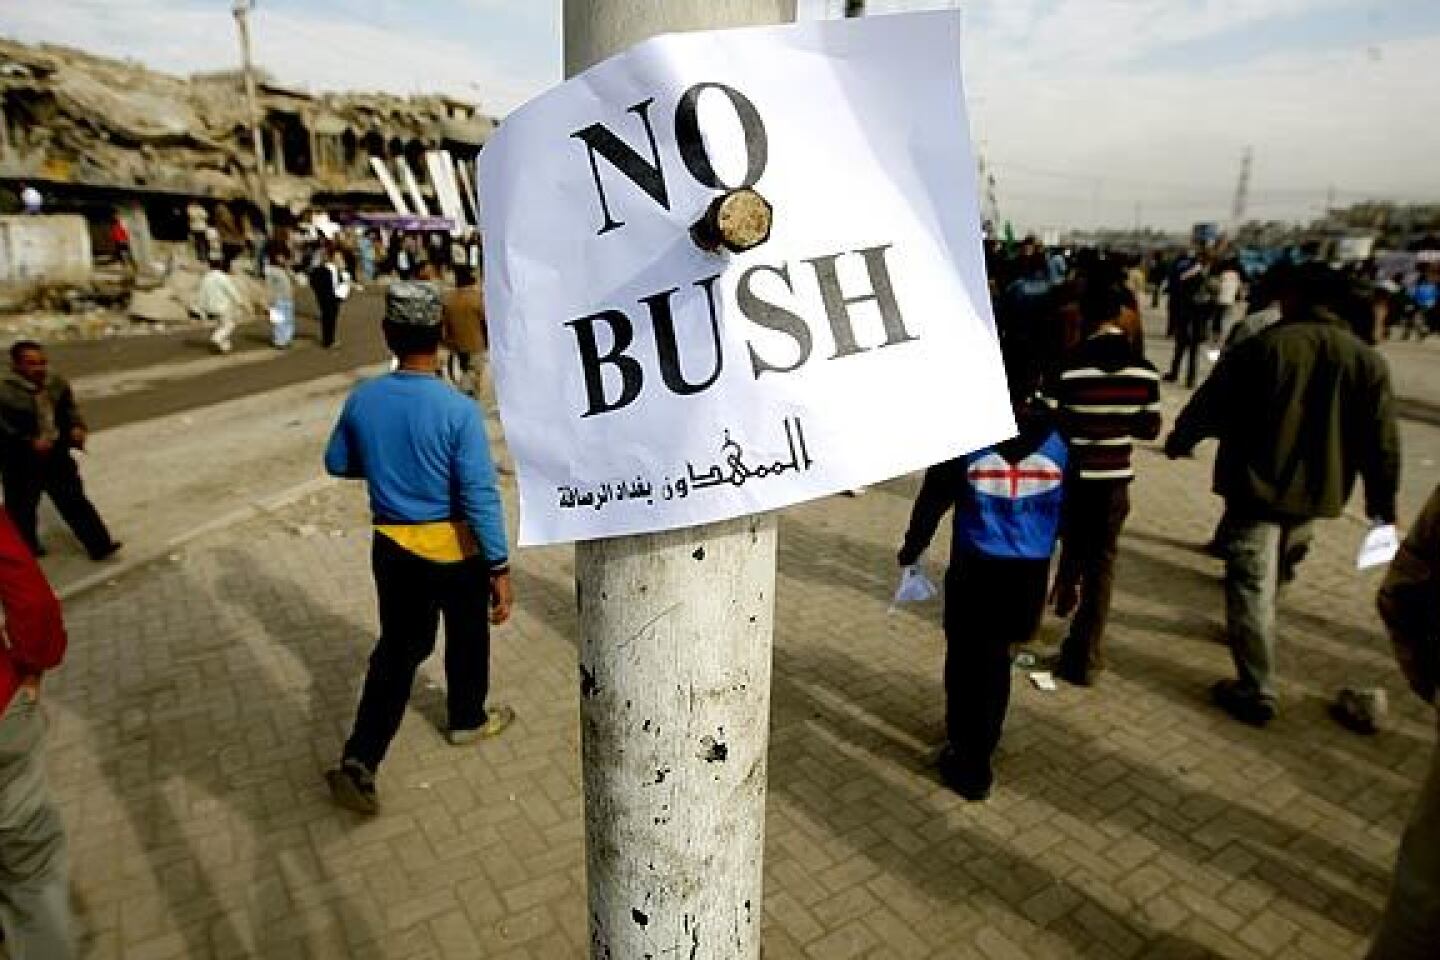 A protest sign is placed on a pole in Sadr City after the arrest of an Iraqi journalist who threw his shoes at President Bush during the president's surprise farewell visit to Iraq.